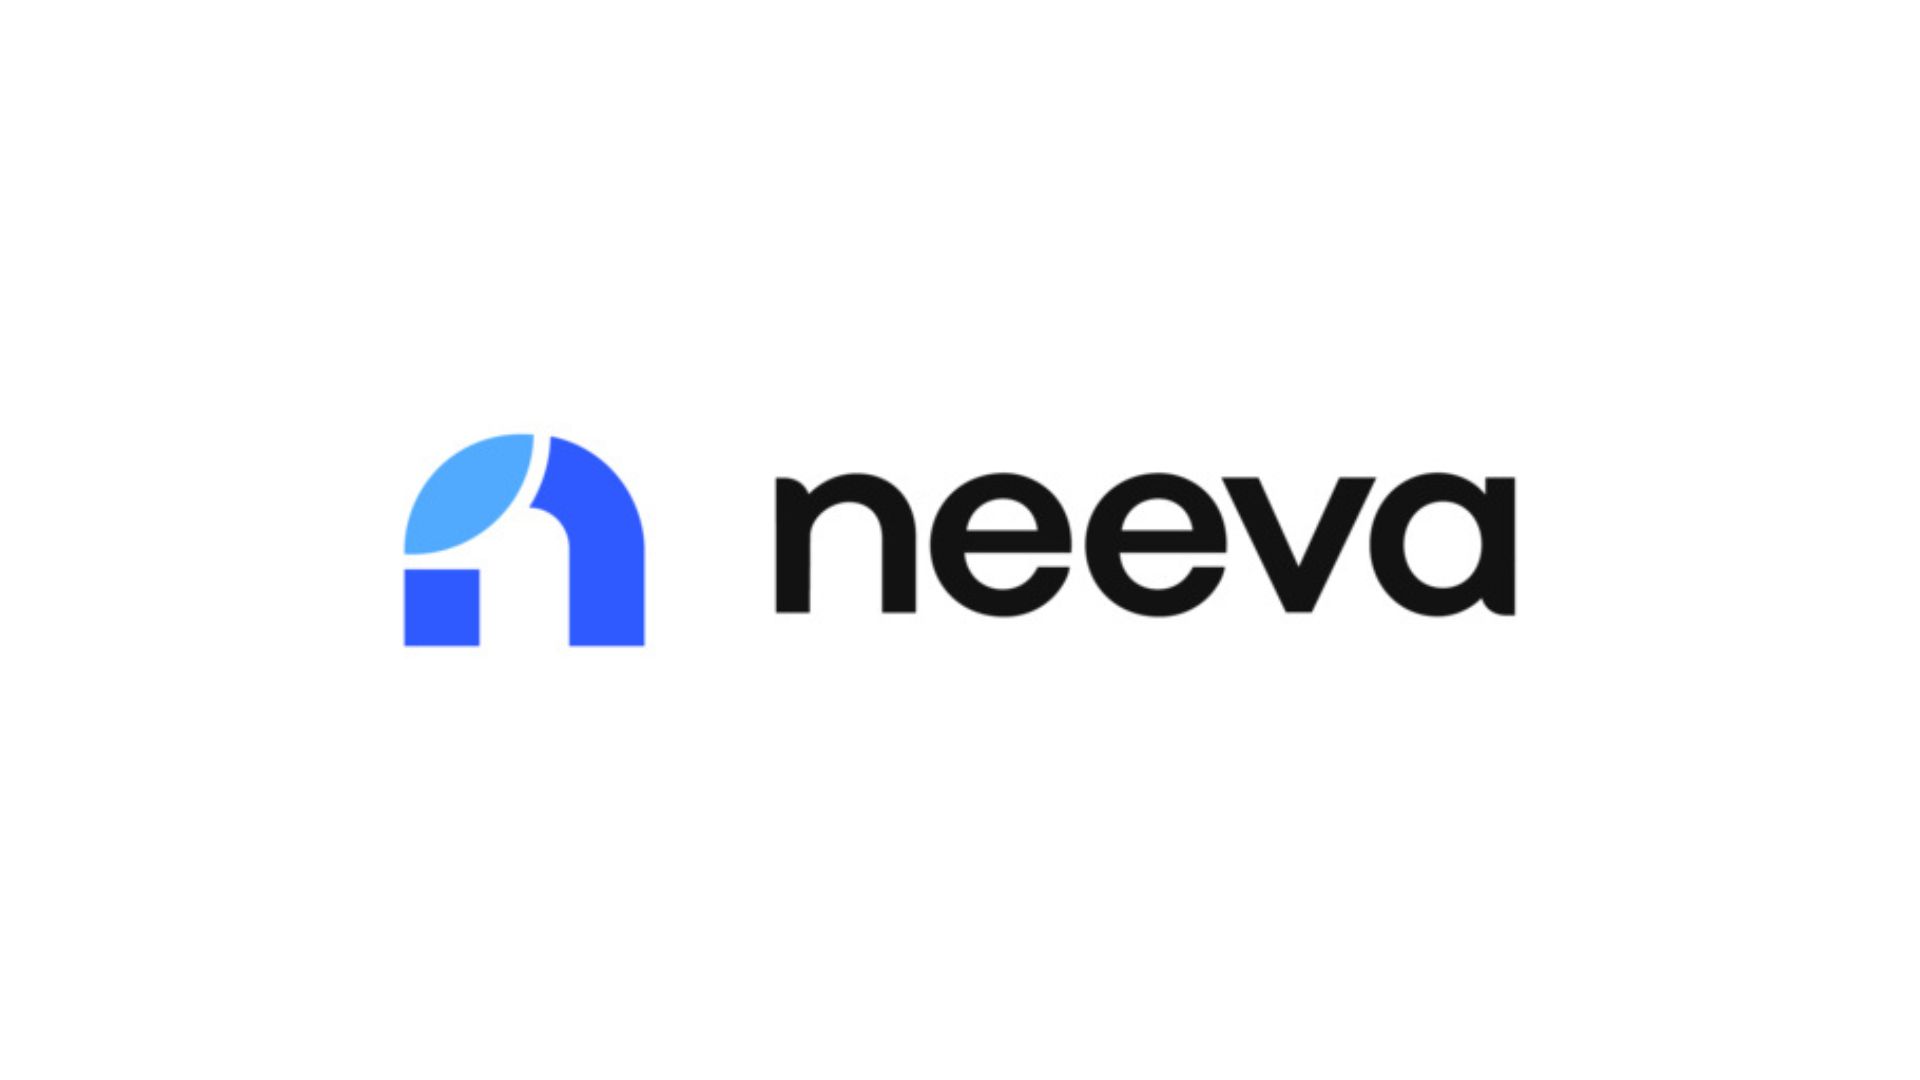 Neeva Launches in Europe to Opponent Google Search